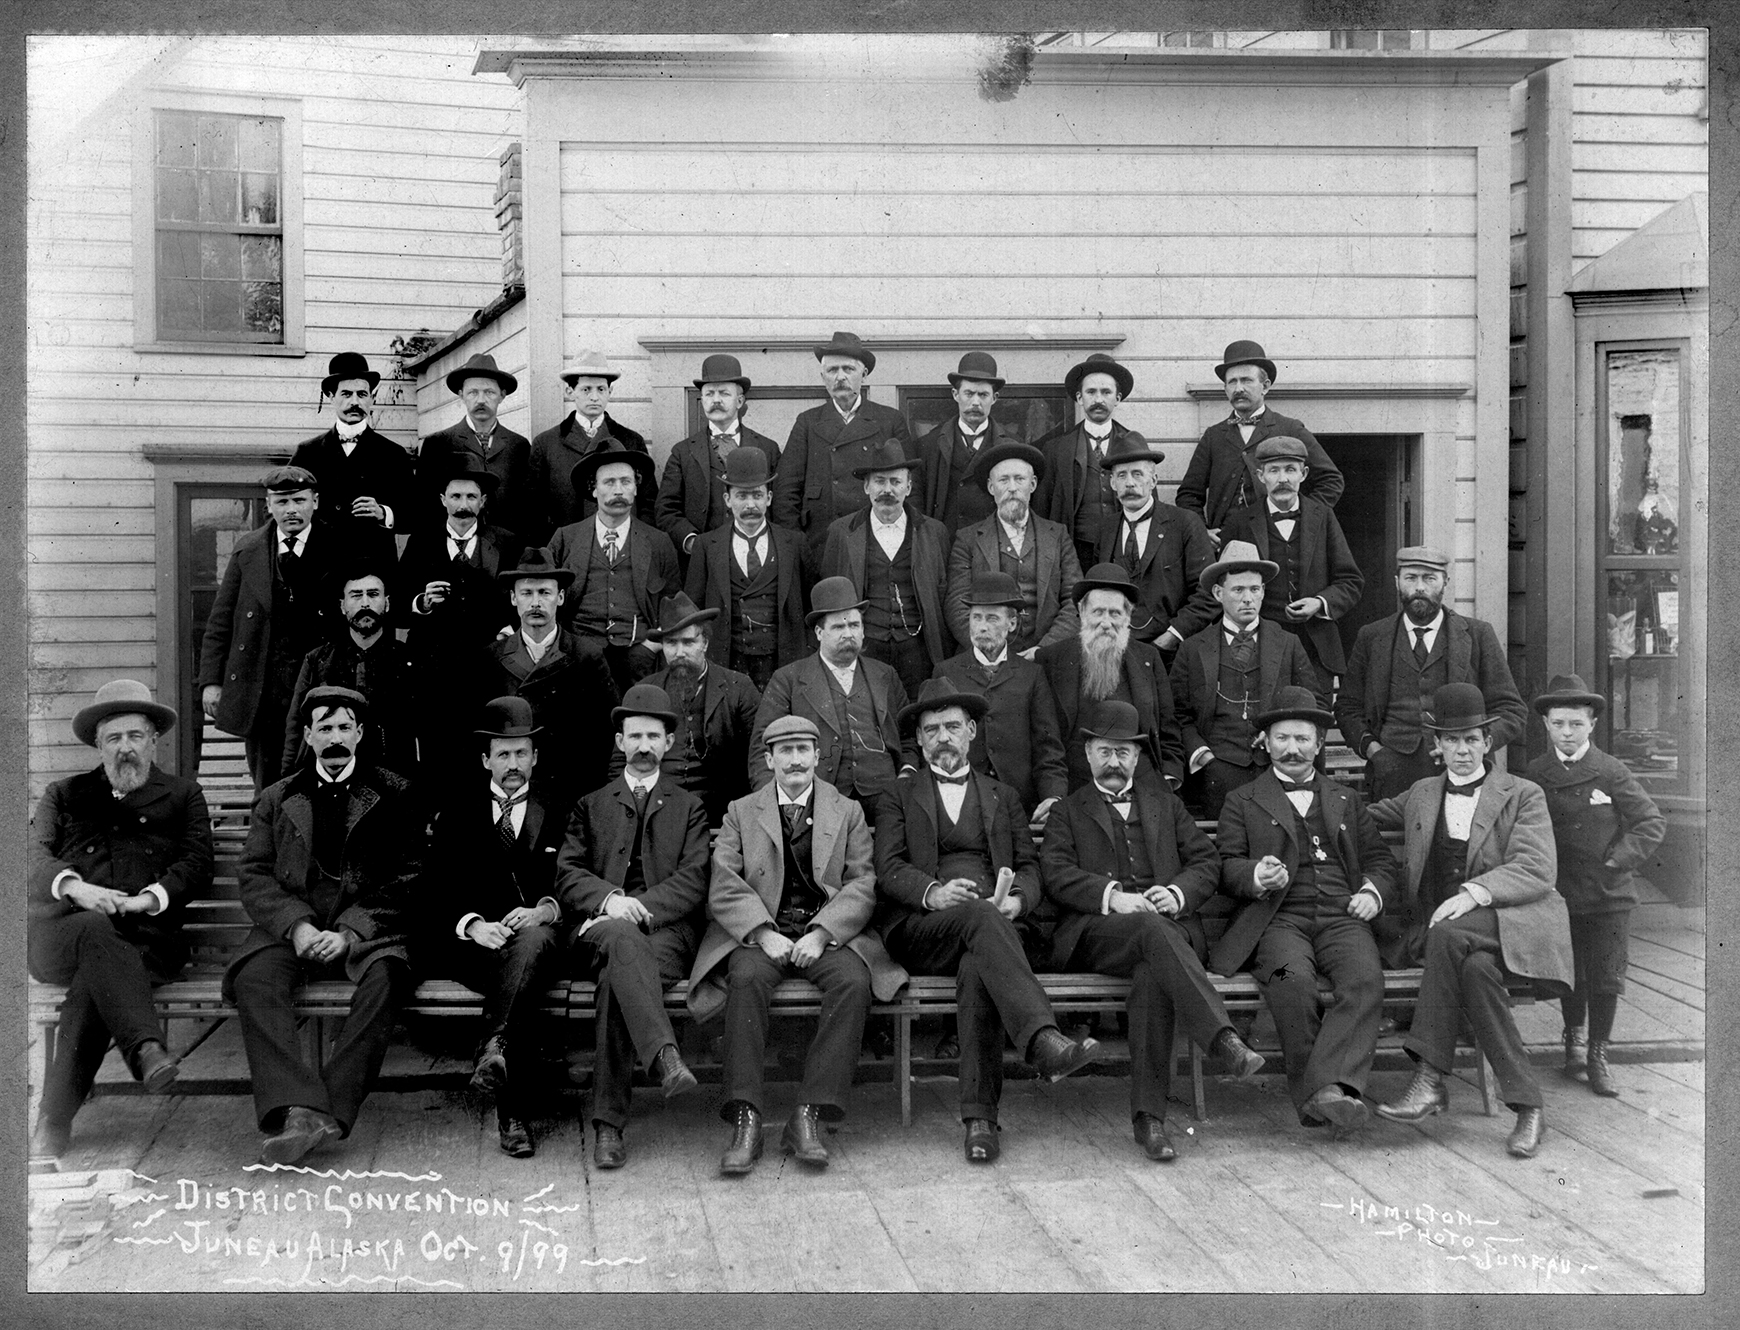 District Convention, Juneau, Alaska, Oct. 9, 1899. Delegates to District Convention pose with their hats on. Juneau-People-17 [detail] Alaska State Library Photo Collection. Courtesy of the Alaska State Library.